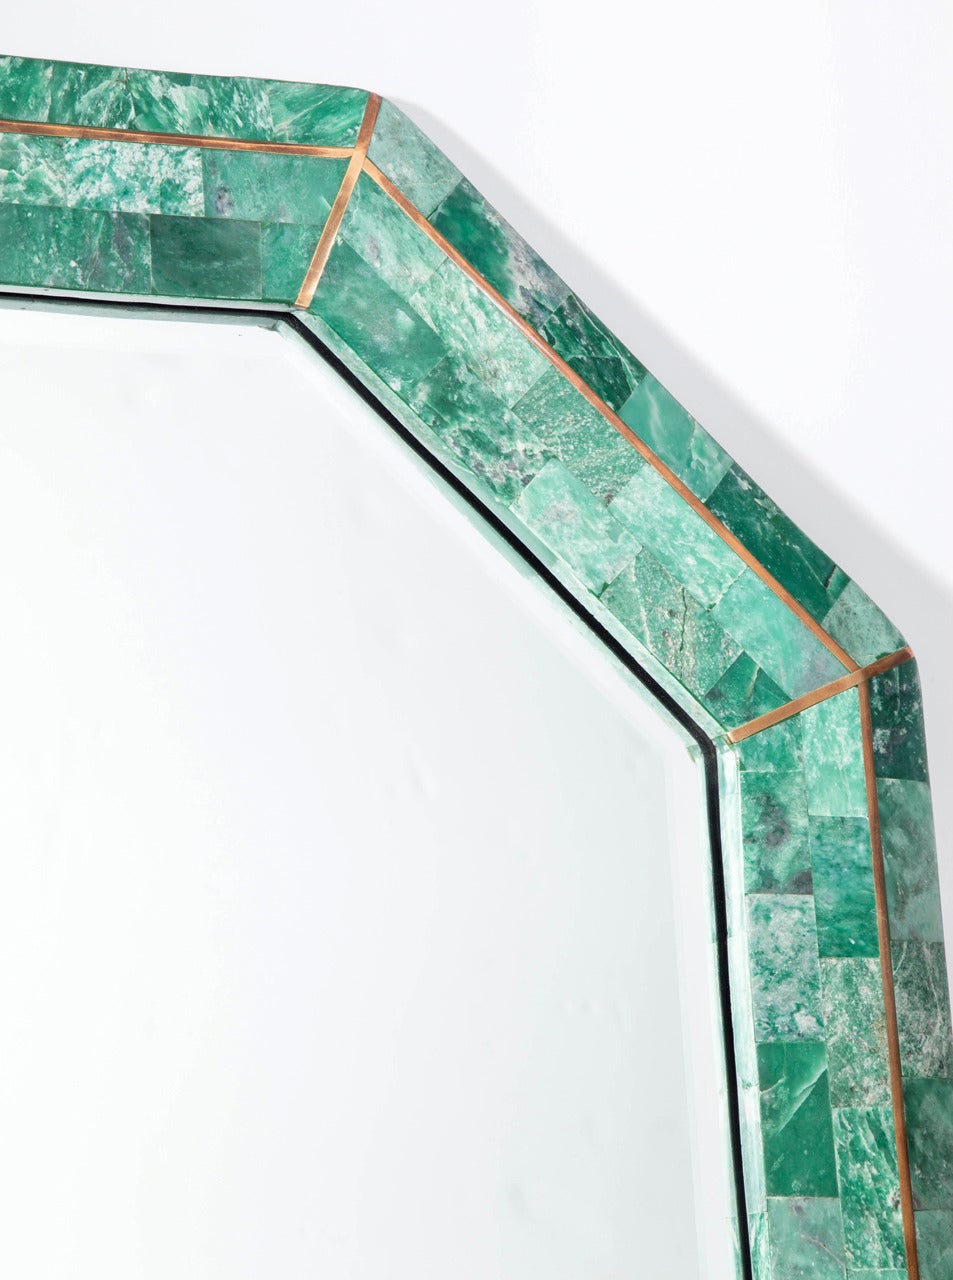 20th Century Tessellated Green Stone Octagonal Mirror with Brass Inlays Signed Maitland-Smith